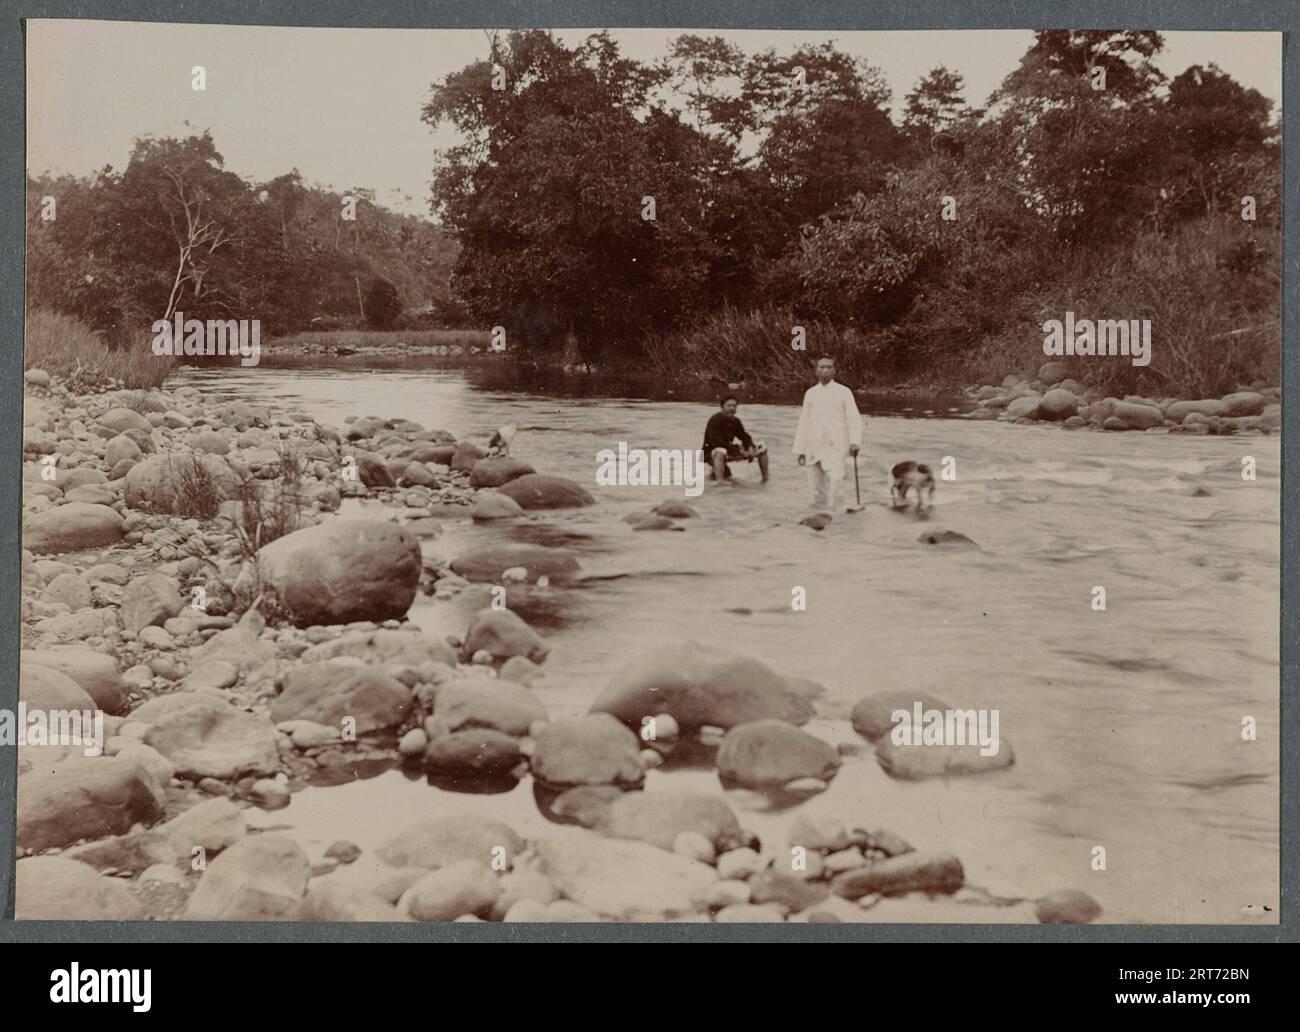 Colonial Dutch Empire in Indonesia, 1900, River with two men posing standing in the water. Stock Photo